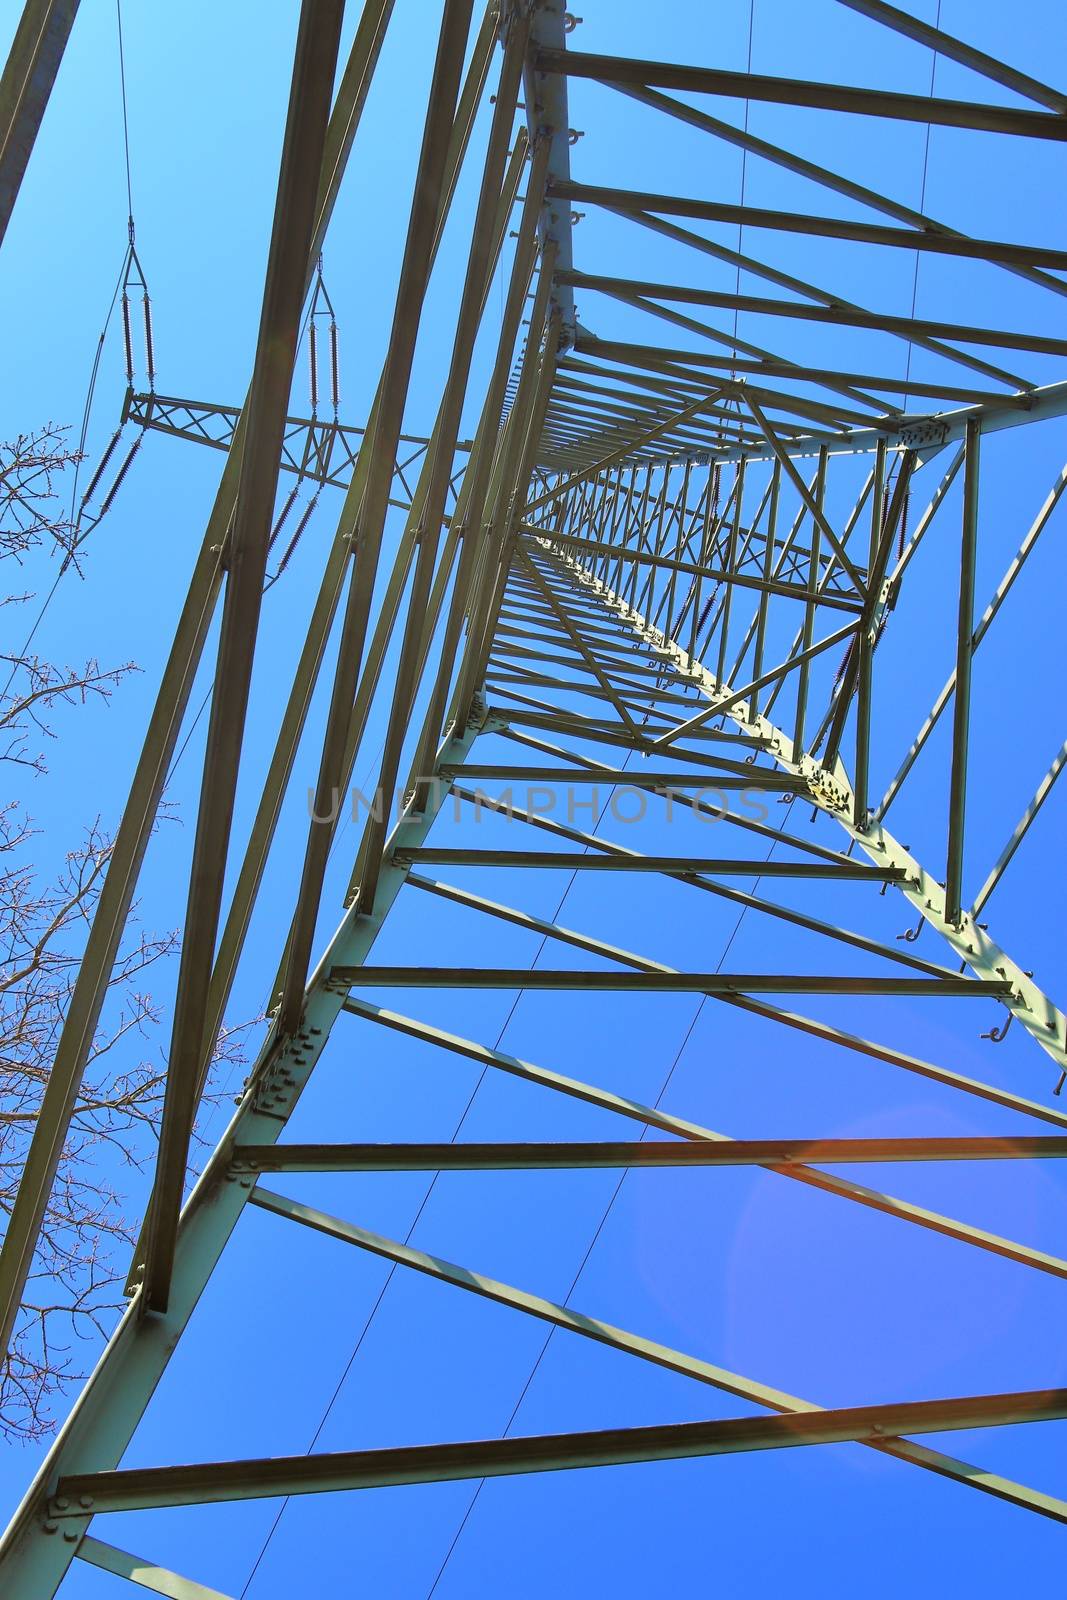 Close up view on a big power pylon transporting electricity in a by MP_foto71